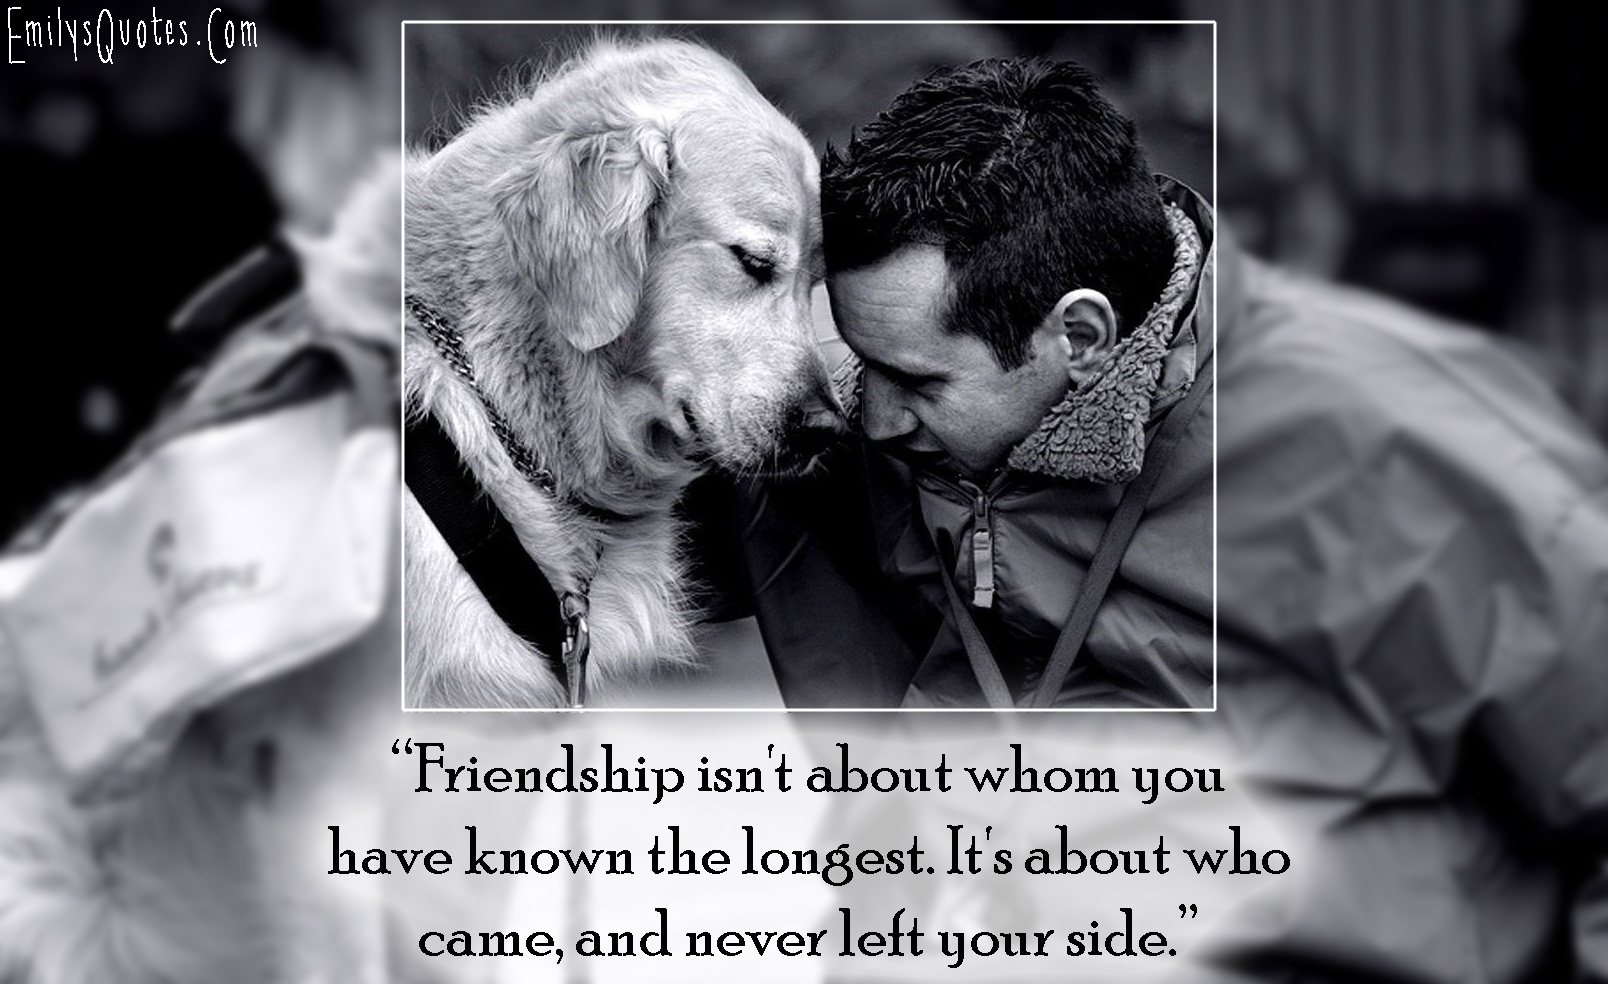 Friendship isn’t about whom you have known the longest. It’s about who came, and never left your side